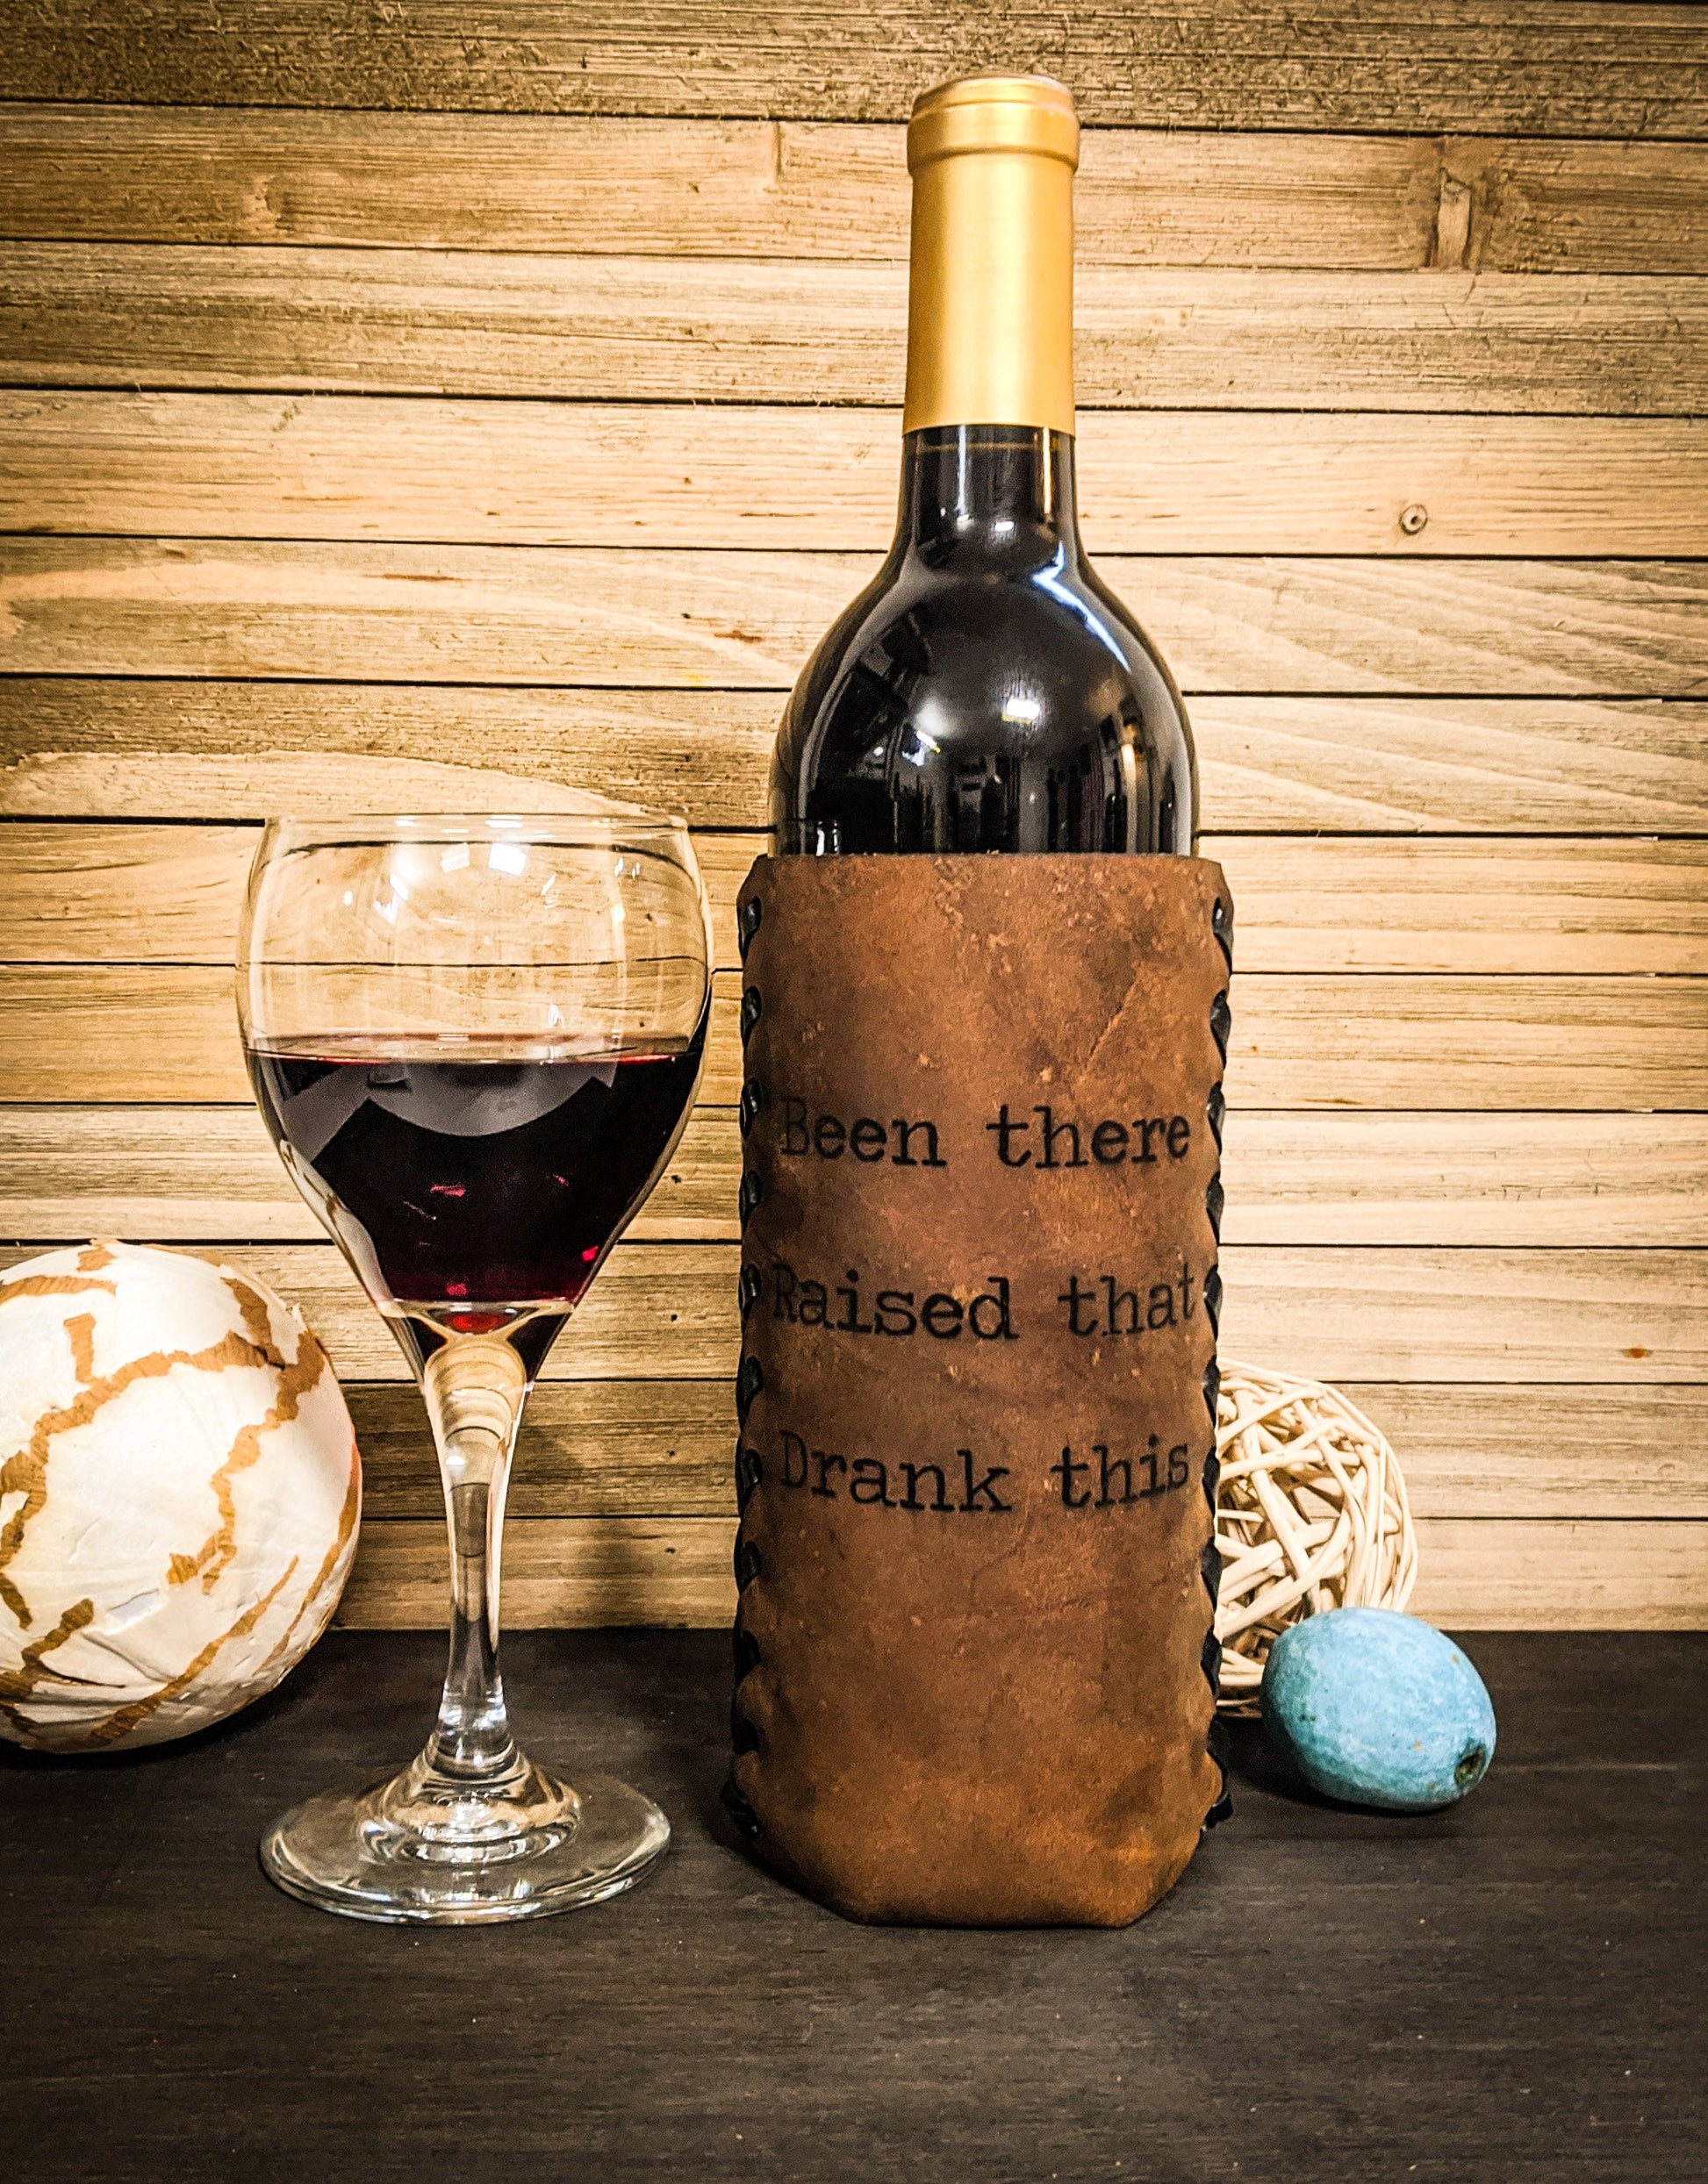 Leather wrapped wine bottle with hand lacing in Brown with saying "been there raised that" 3-year wedding anniversary gift for a woman